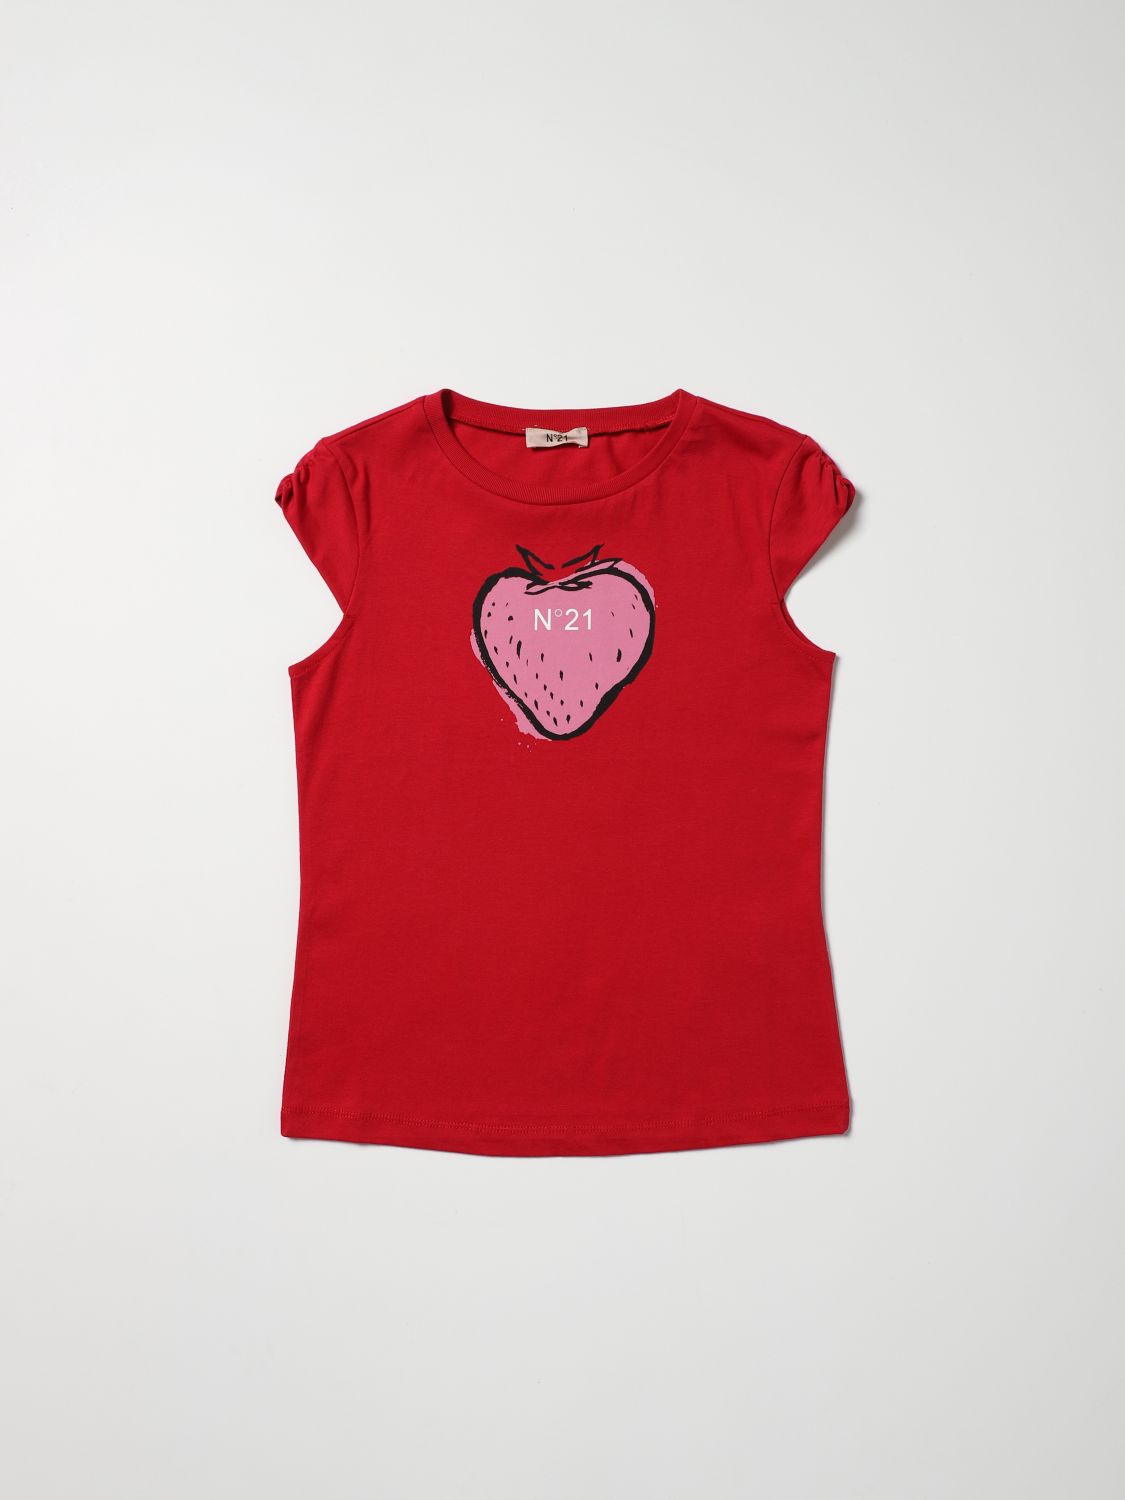 N°21 Kids' N ° 21 Cotton T-shirt With Strawberry Print In Red